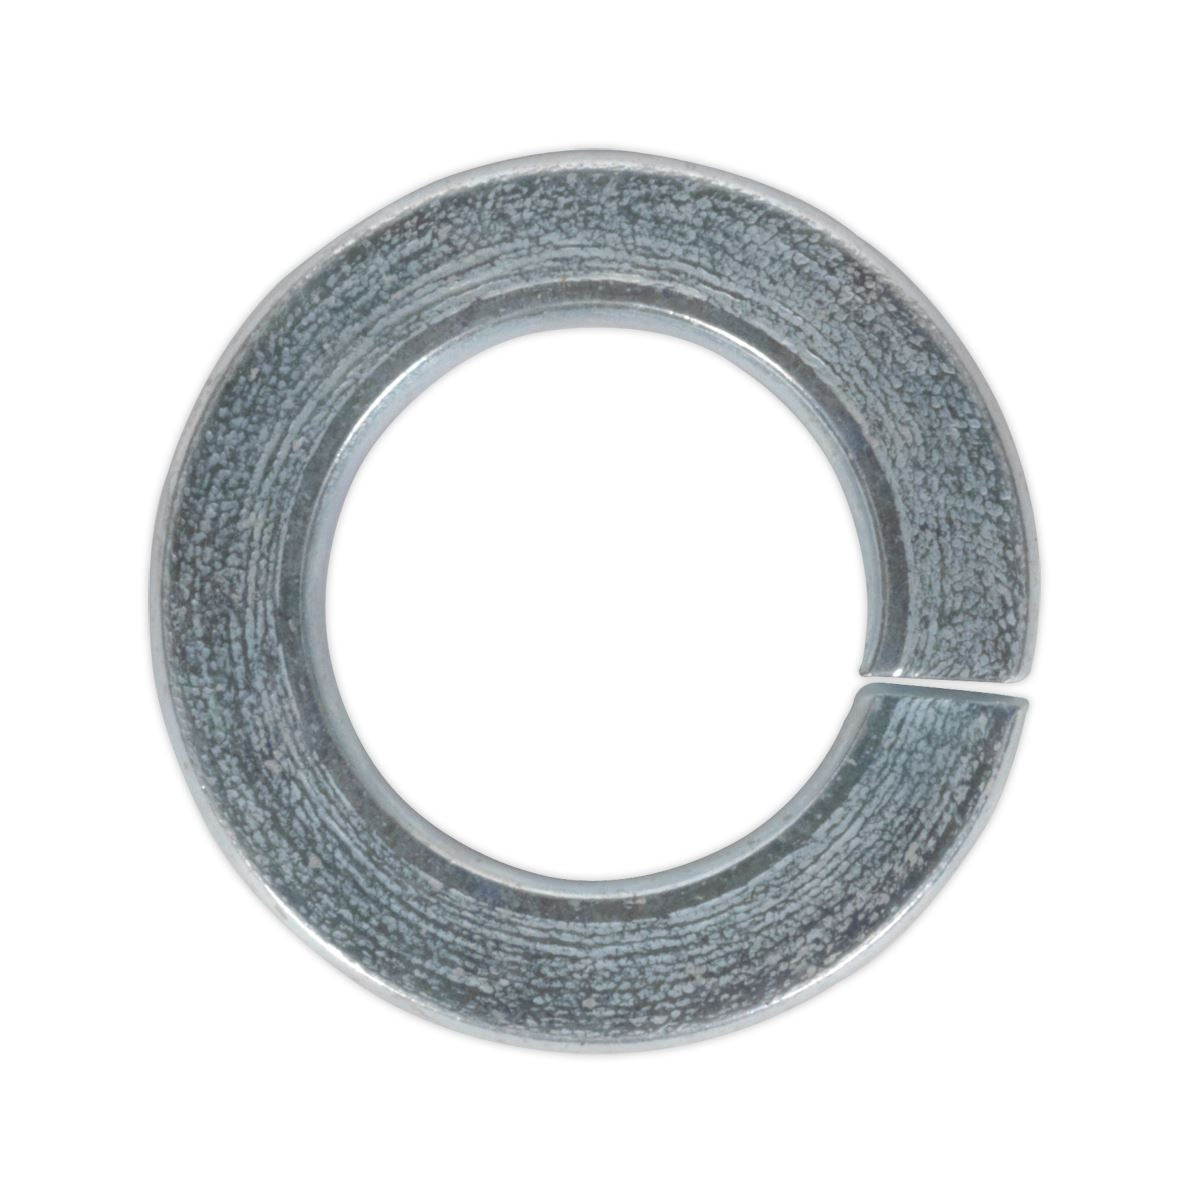 Sealey Spring Washer DIN 127B M12 Zinc Pack of 50